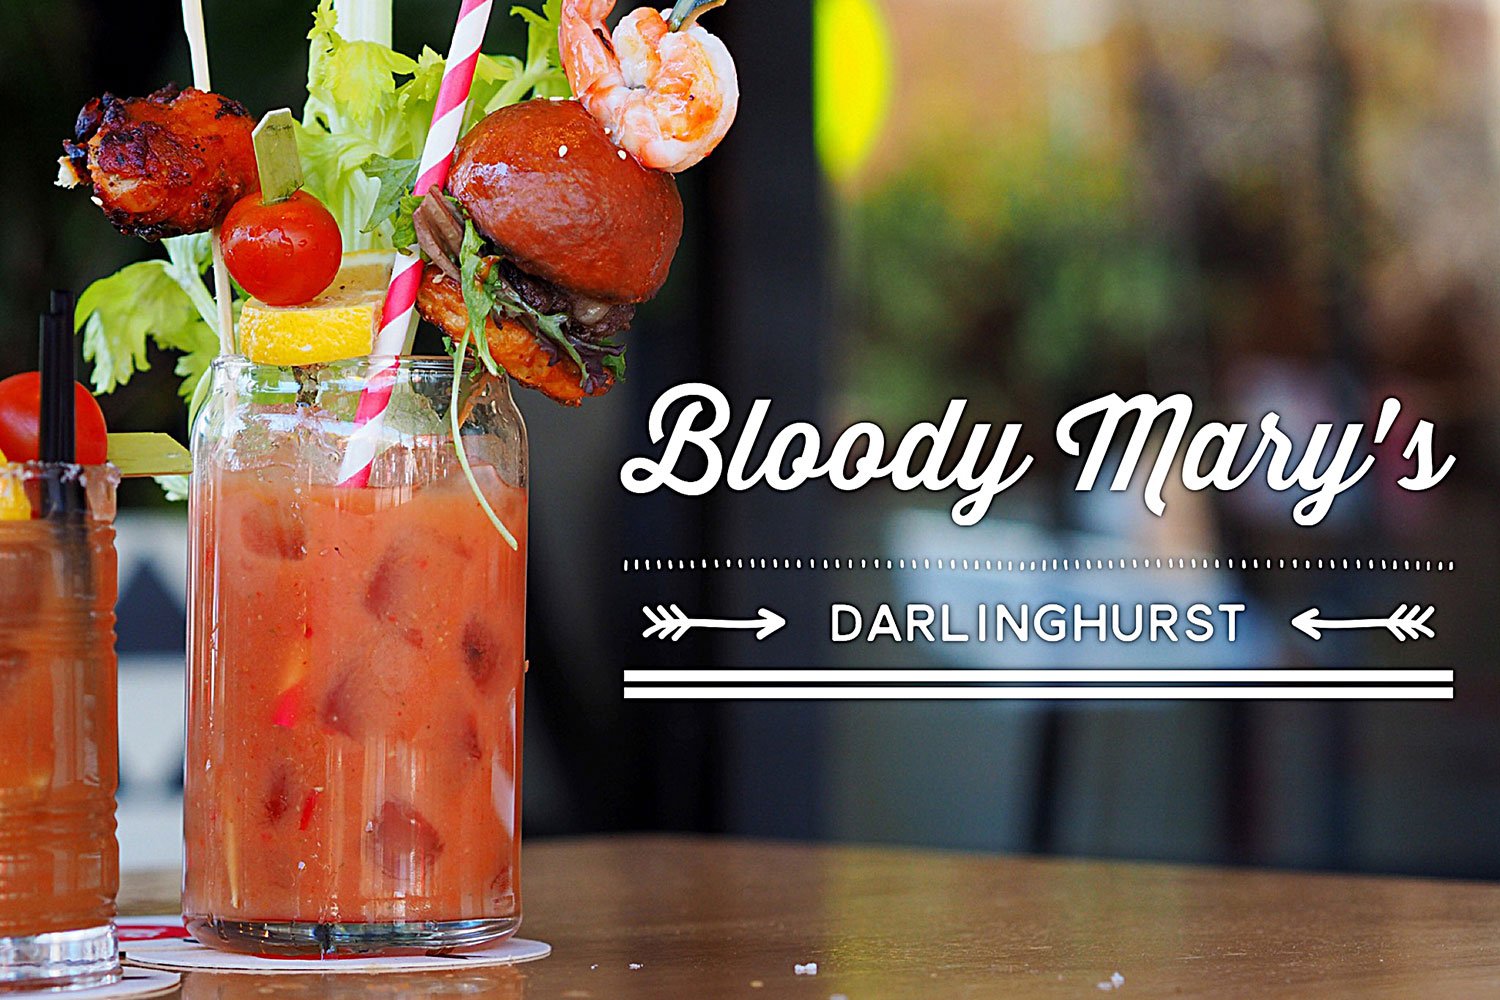 Sydney Food Blog Review of Bloody Mary's, Darlinghurst